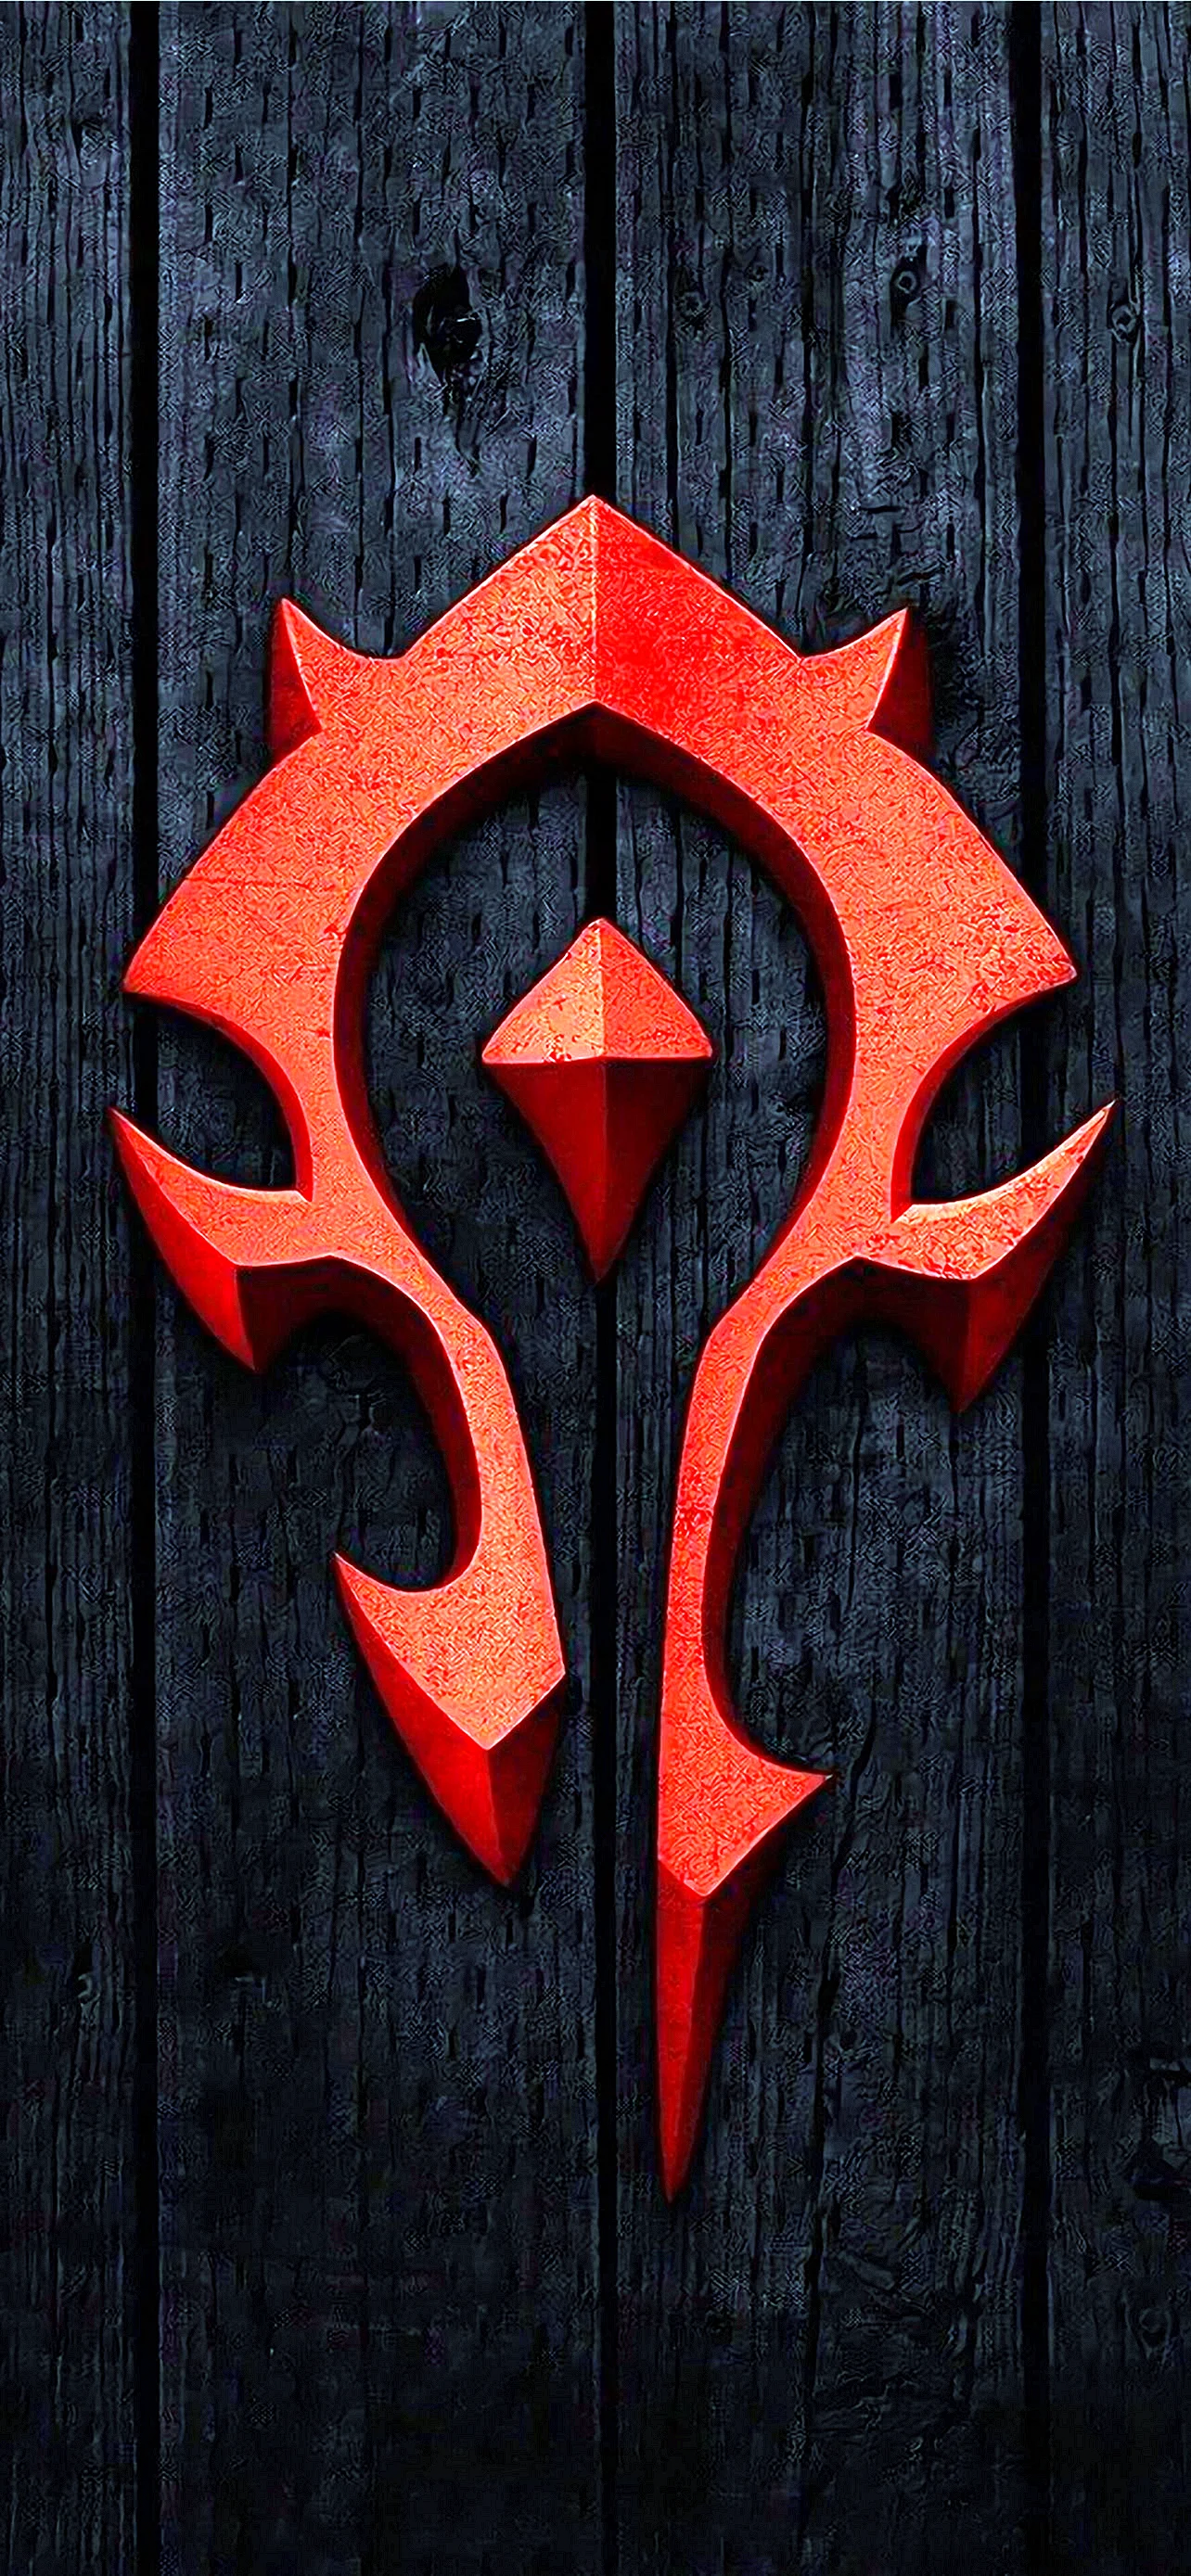 World Of Warcraft The Horde Wallpaper for iPhone 12 Pro Max